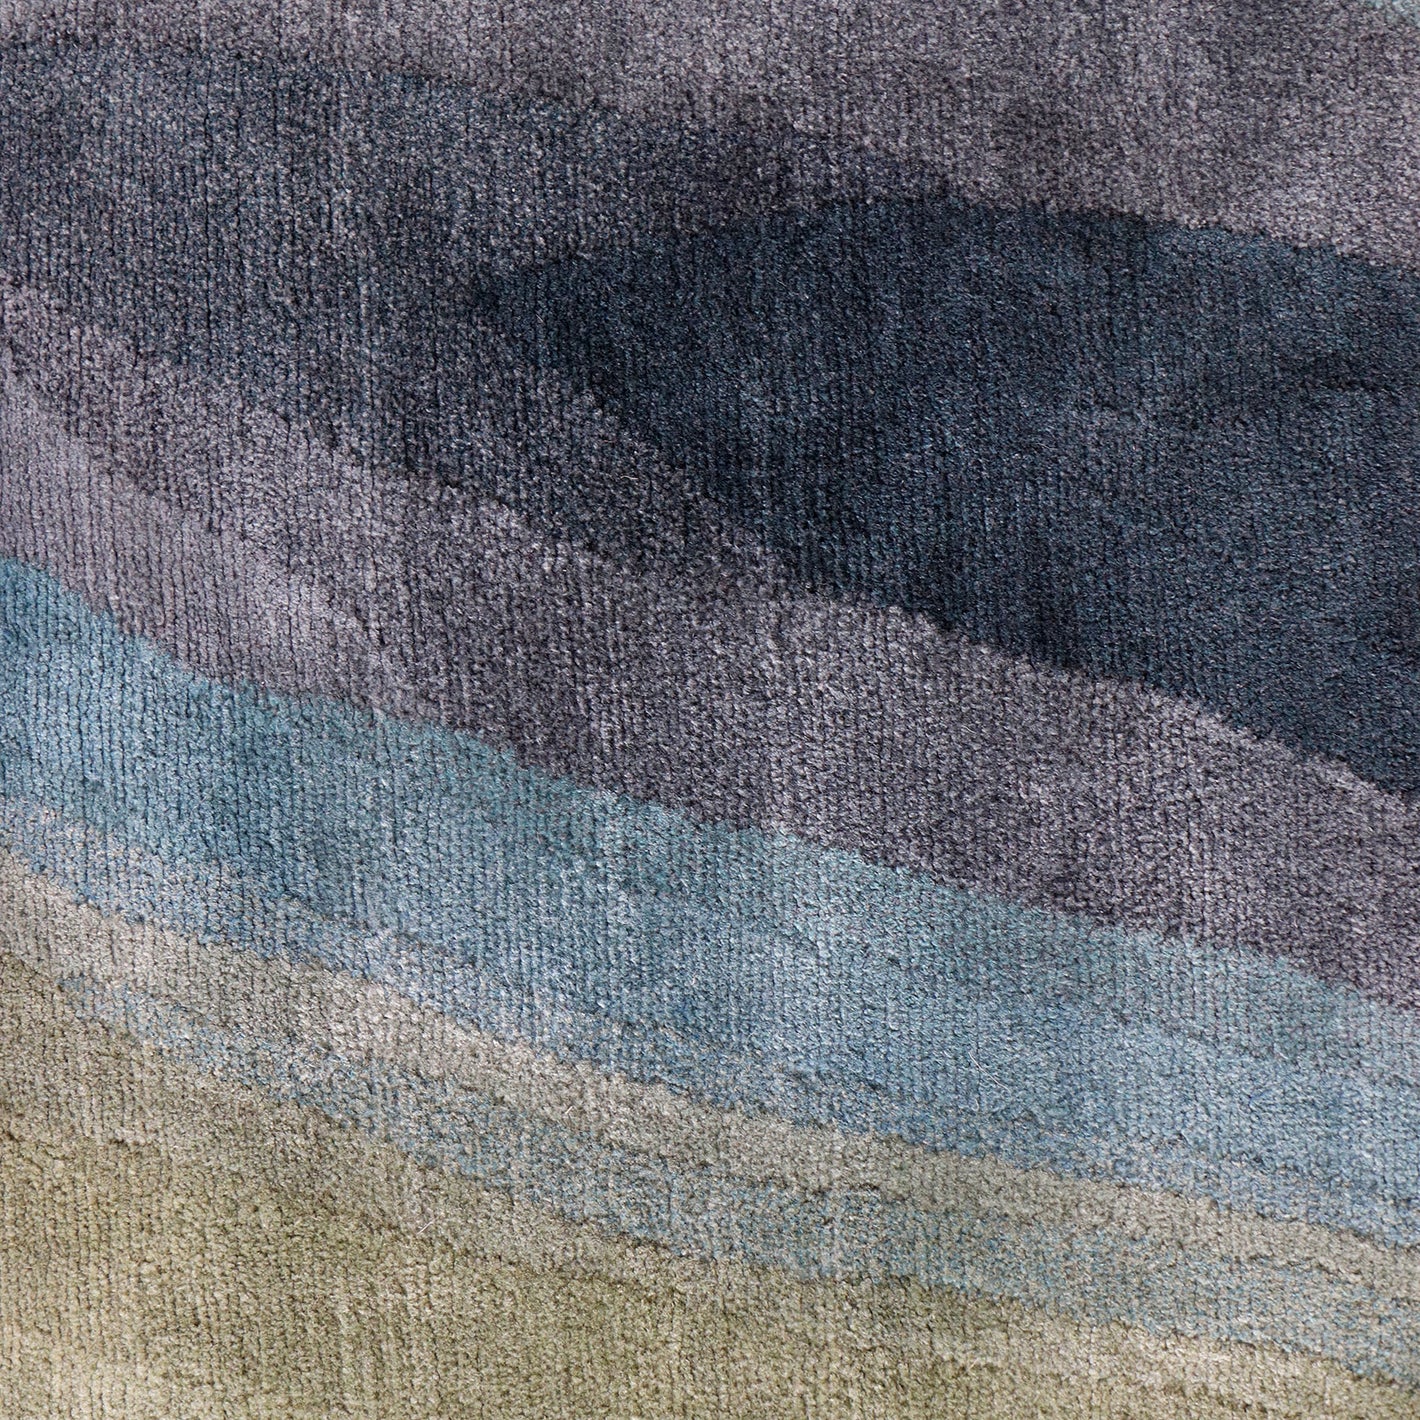 A close up image of a blue and grey rug